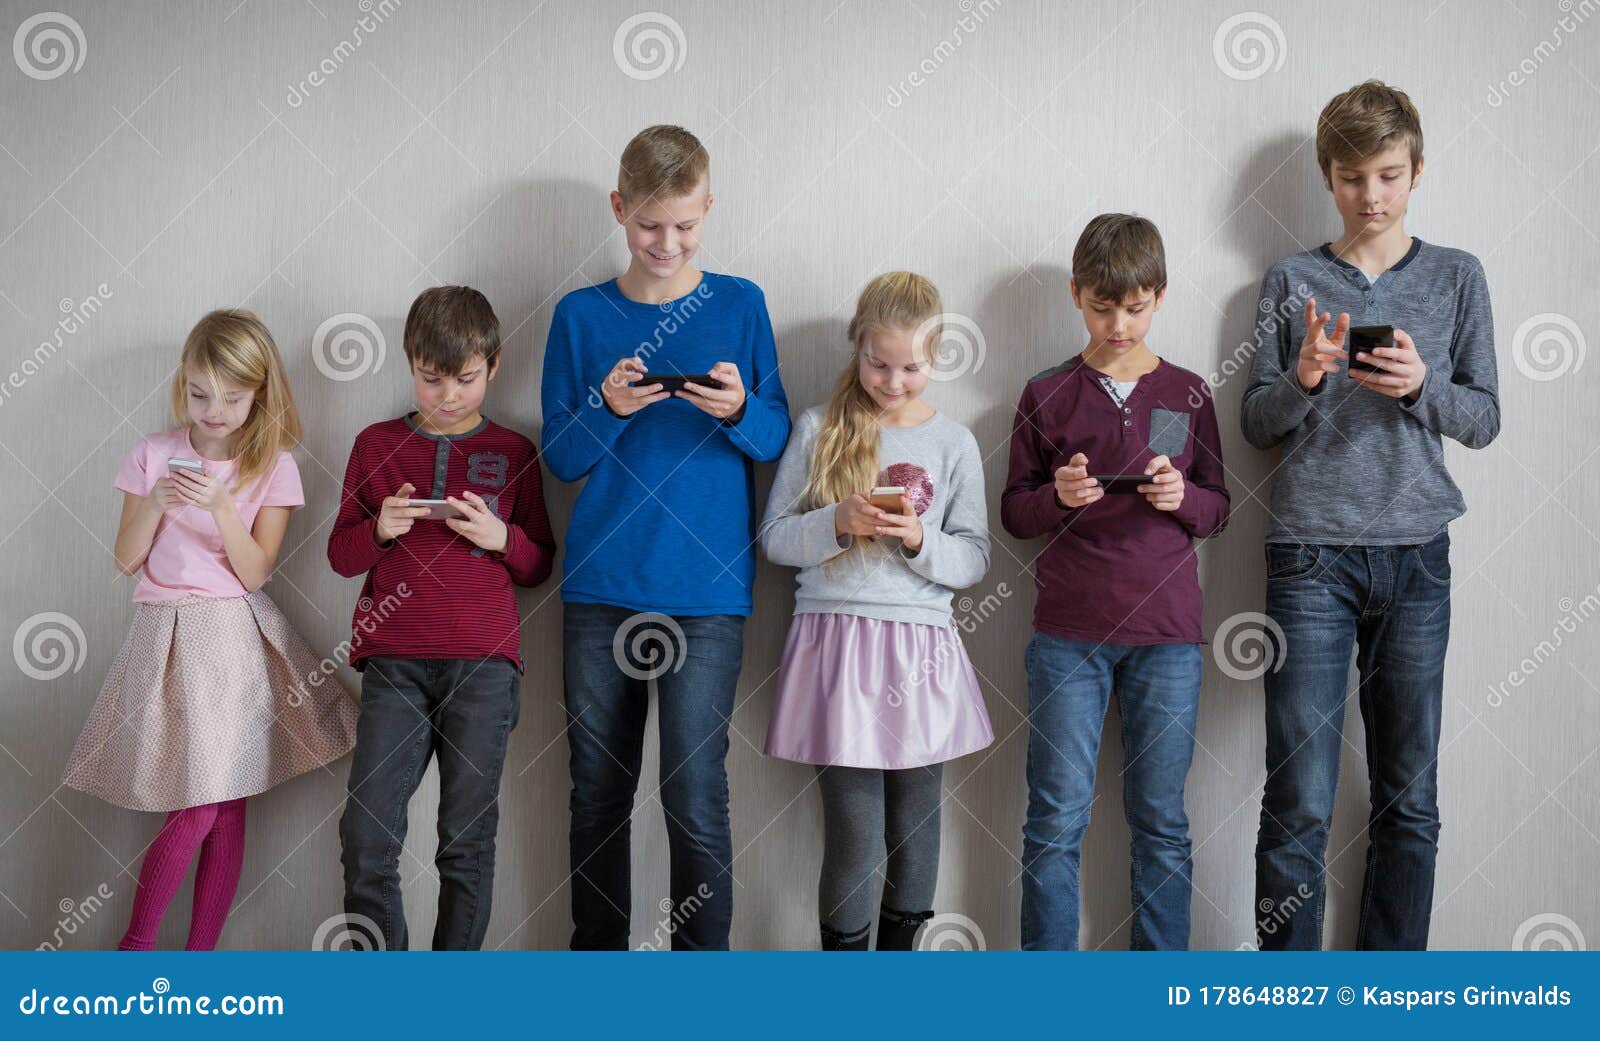 children standing and everyone using their own mobile phone